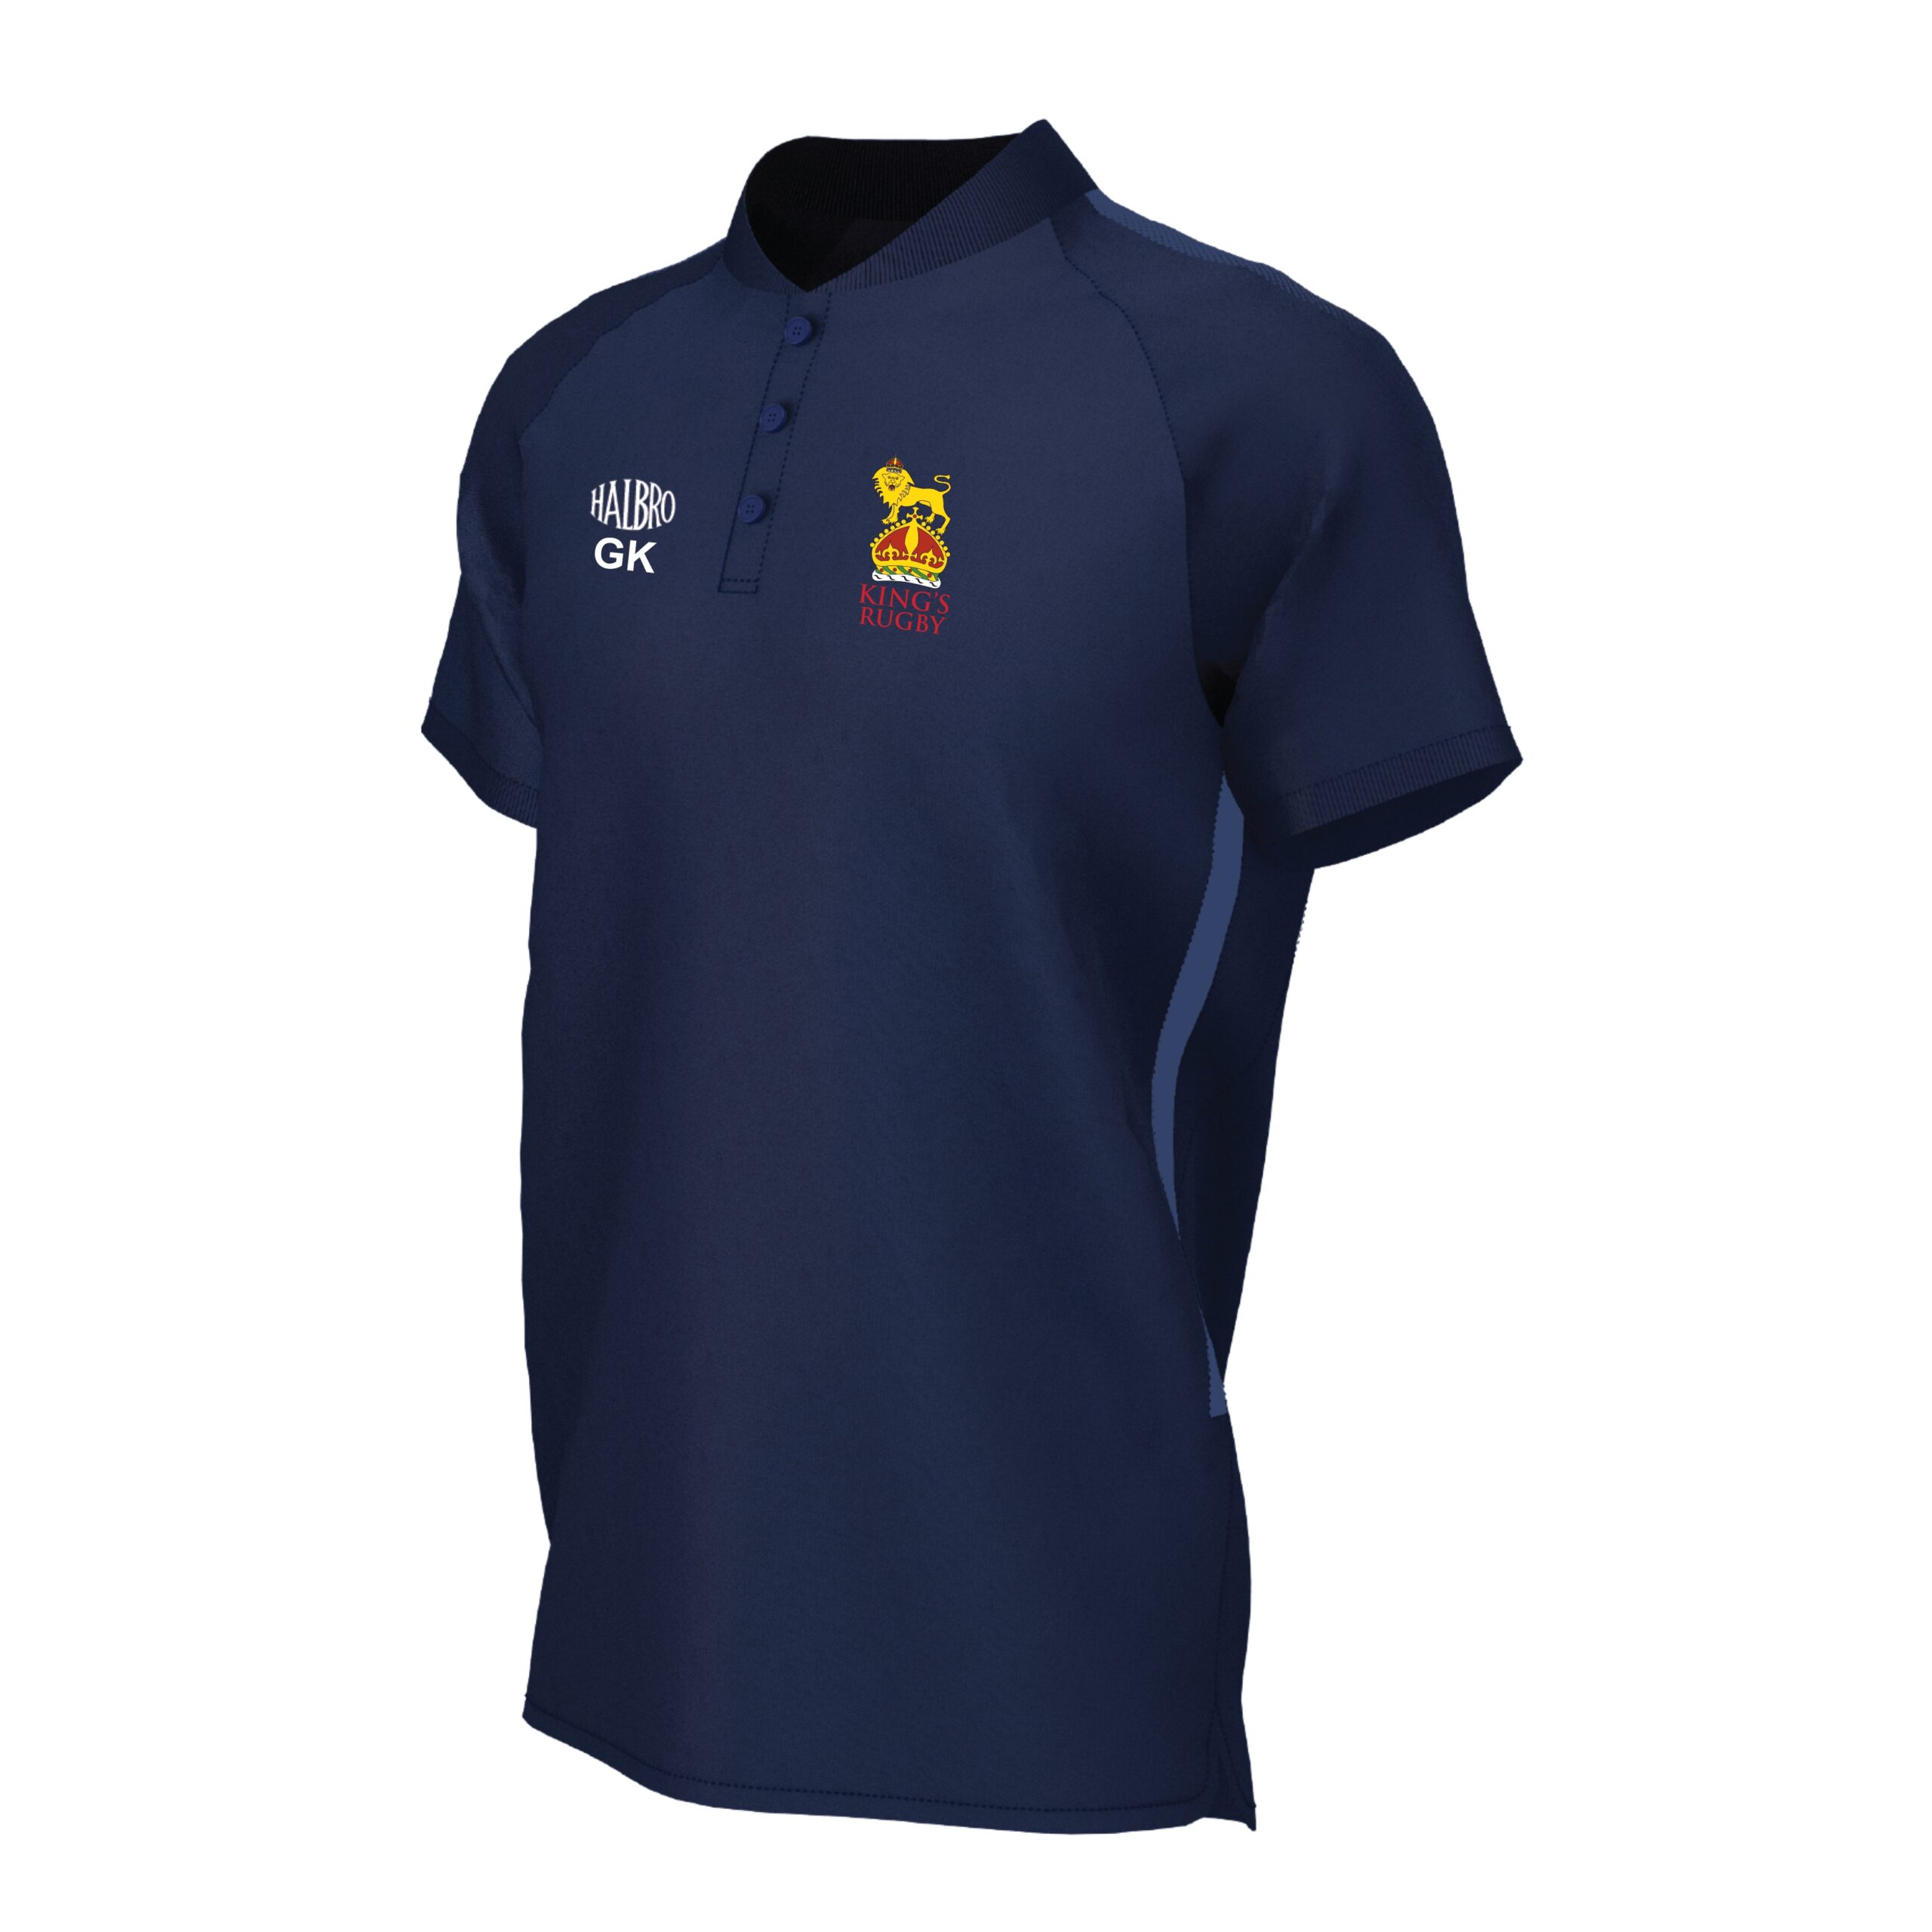 King's Rugby Seniors Cratus Polo - Halbro Sportswear Limited